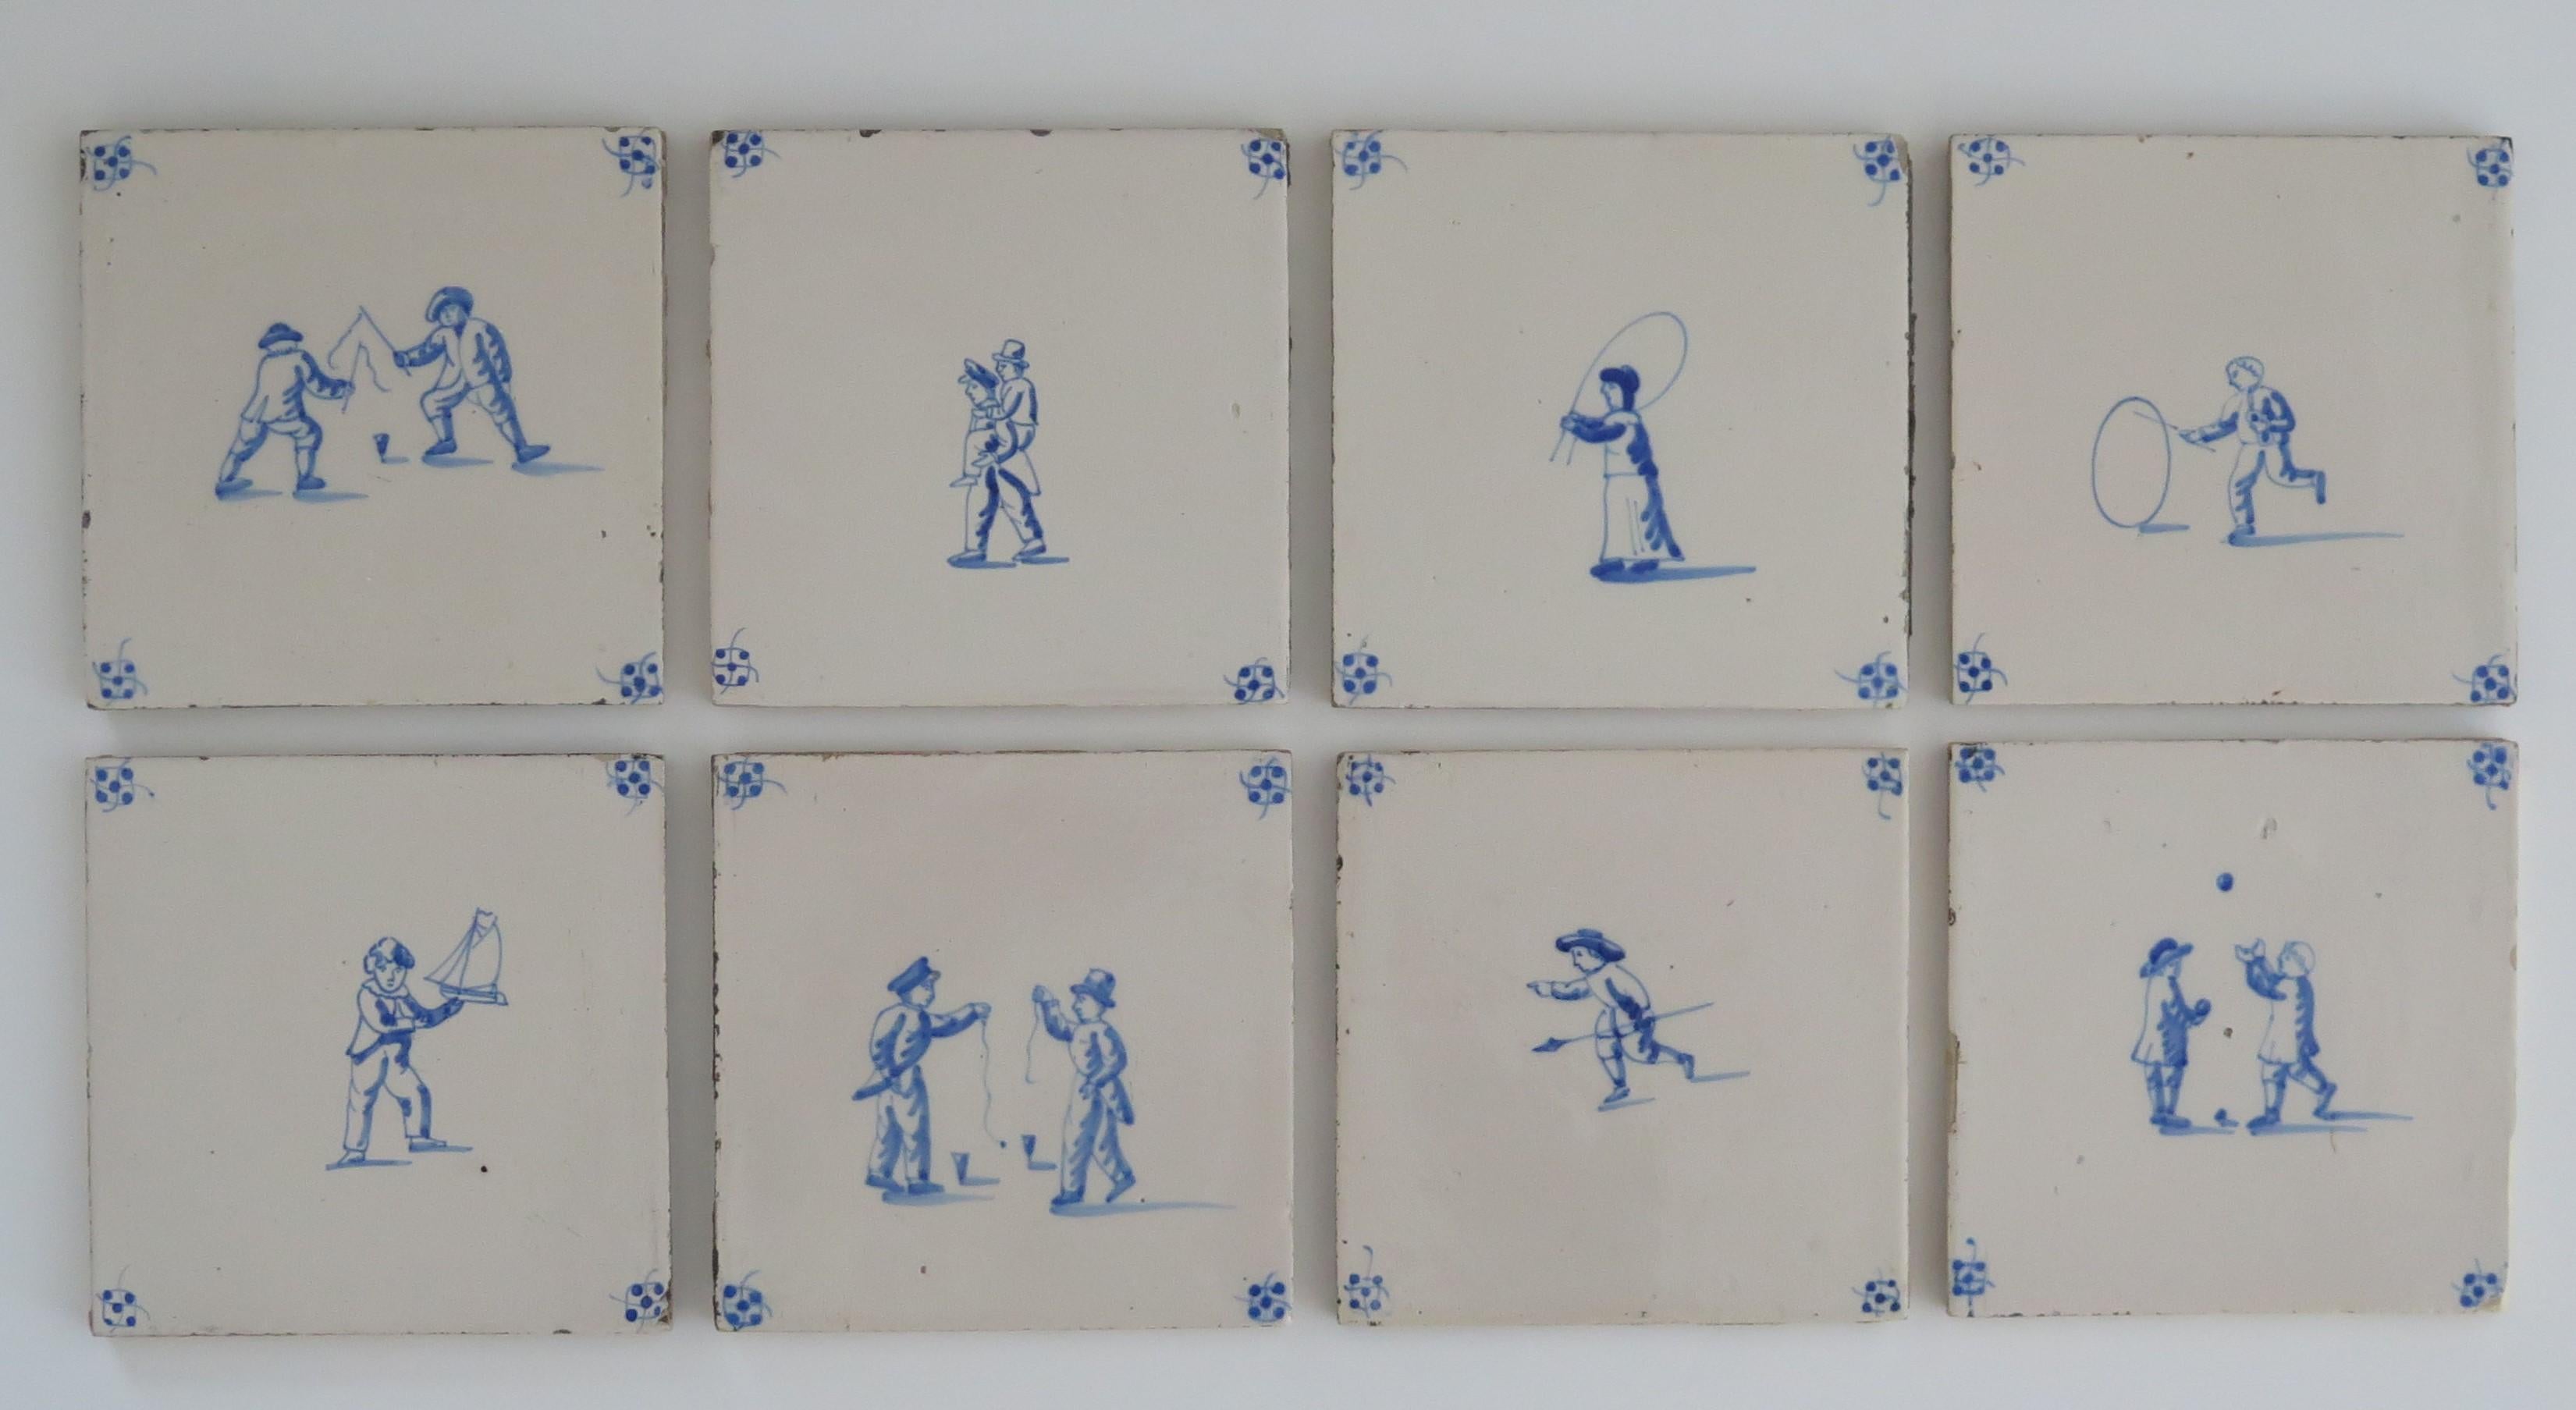 These are a set of eight Delft wall tiles, all with hand painted blue and white scenes of Children playing different games, made in the Netherlands during the 19th century.

The tiles are ceramic, made of earthenware pottery and nominally about